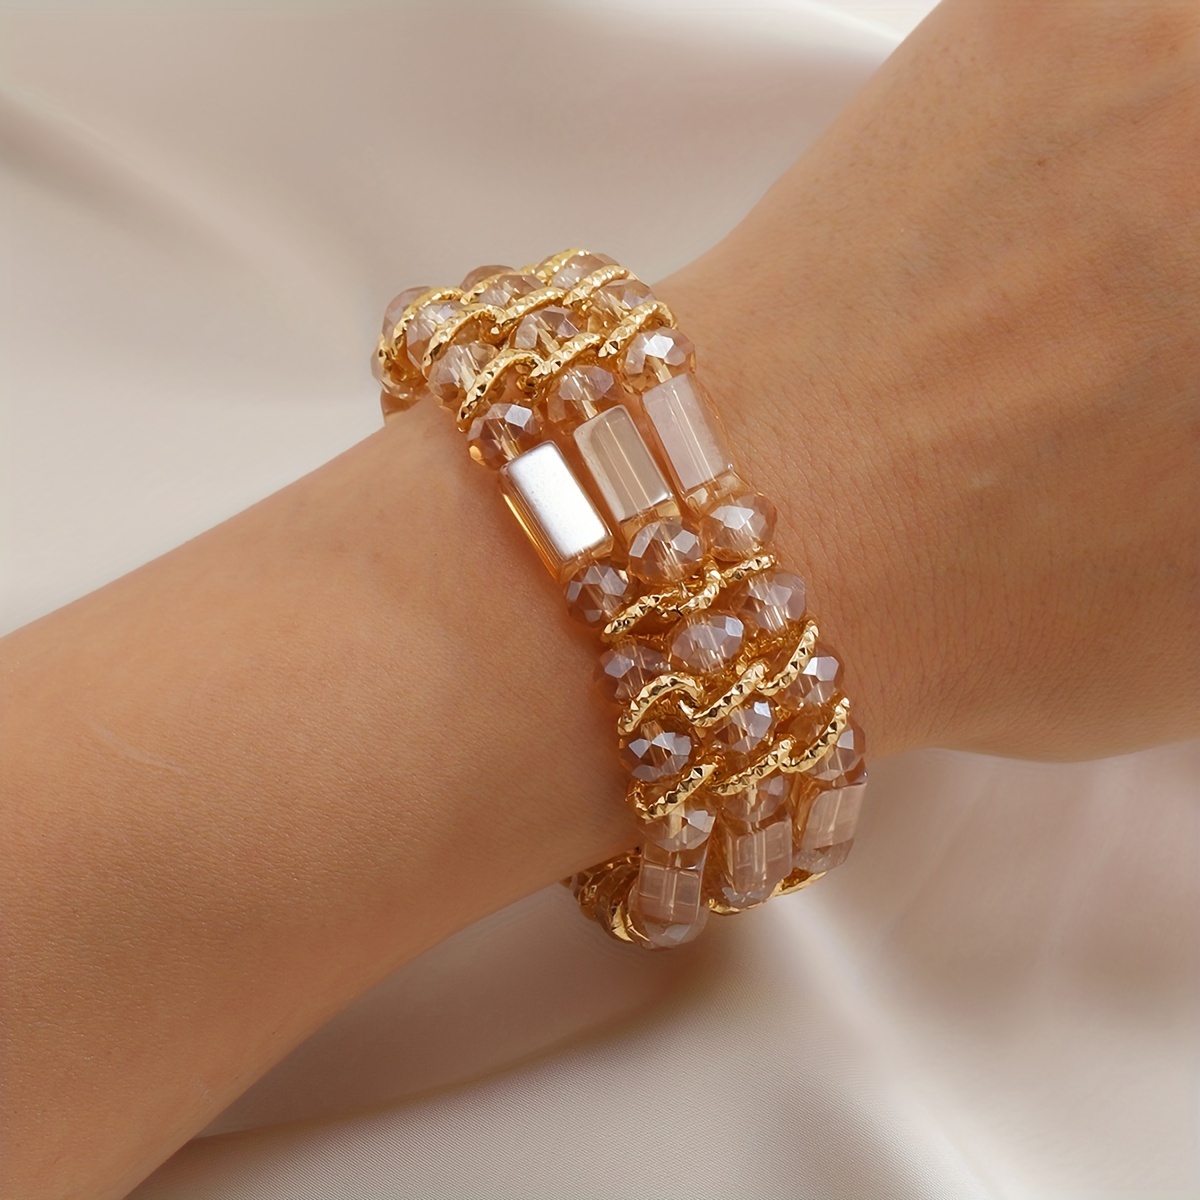 Gold Three's a Party Triple Chain Bracelet